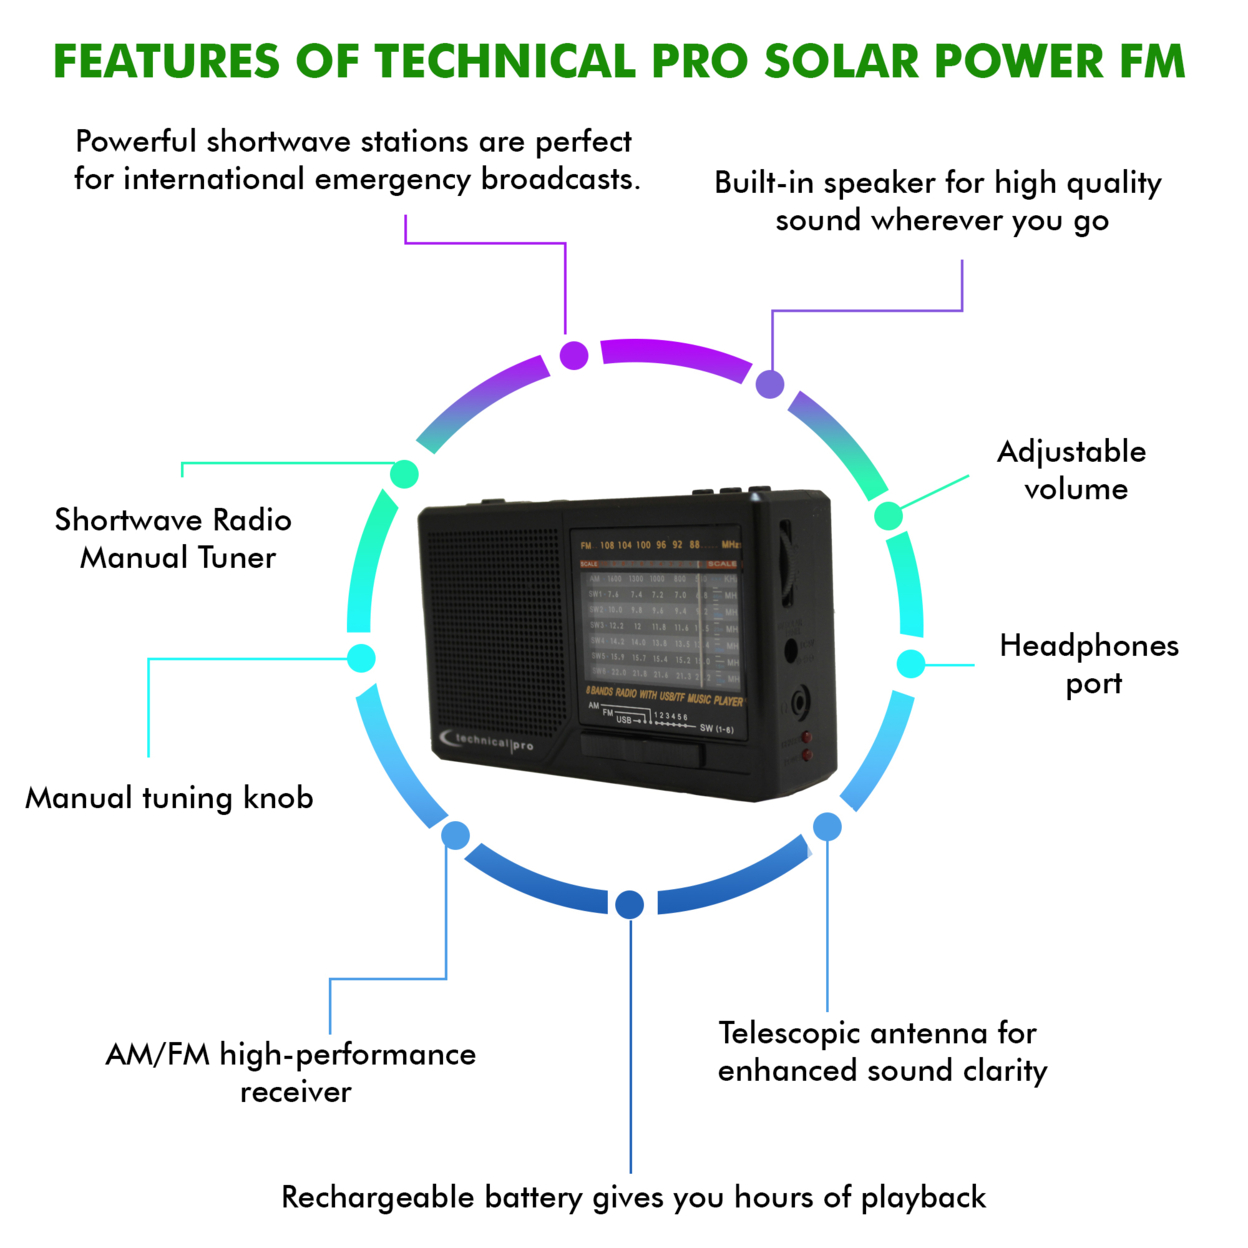 Technical Pro Portable Solar Powered Battery Operated AM FM SW Radio, Built-in Speaker, Flashlight, Rechargeable Battery, Headphone Output